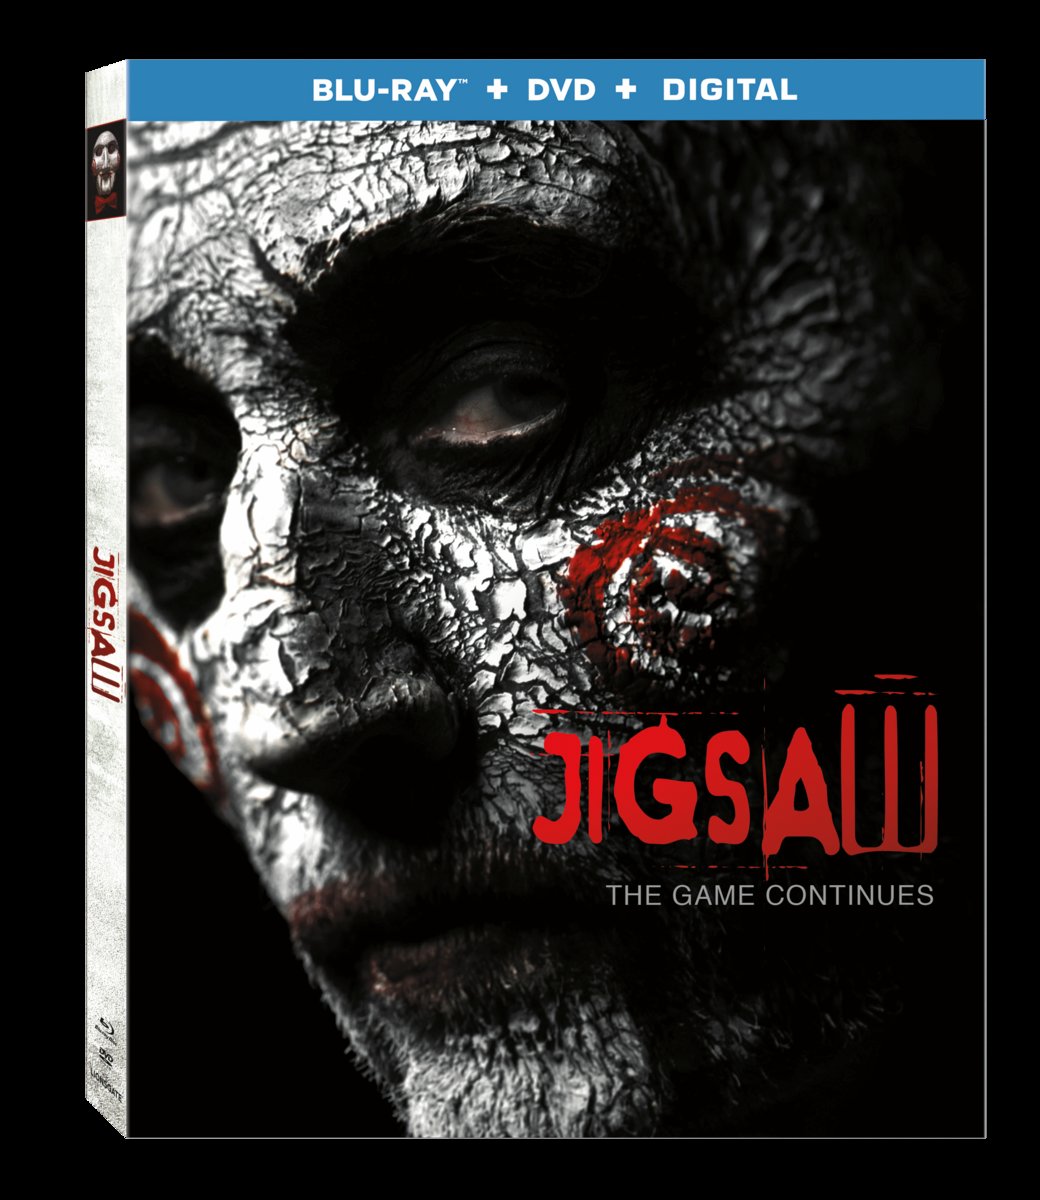 Jigsaw Blu-Ray Combo cover (Lionsgate Home Entertainment)